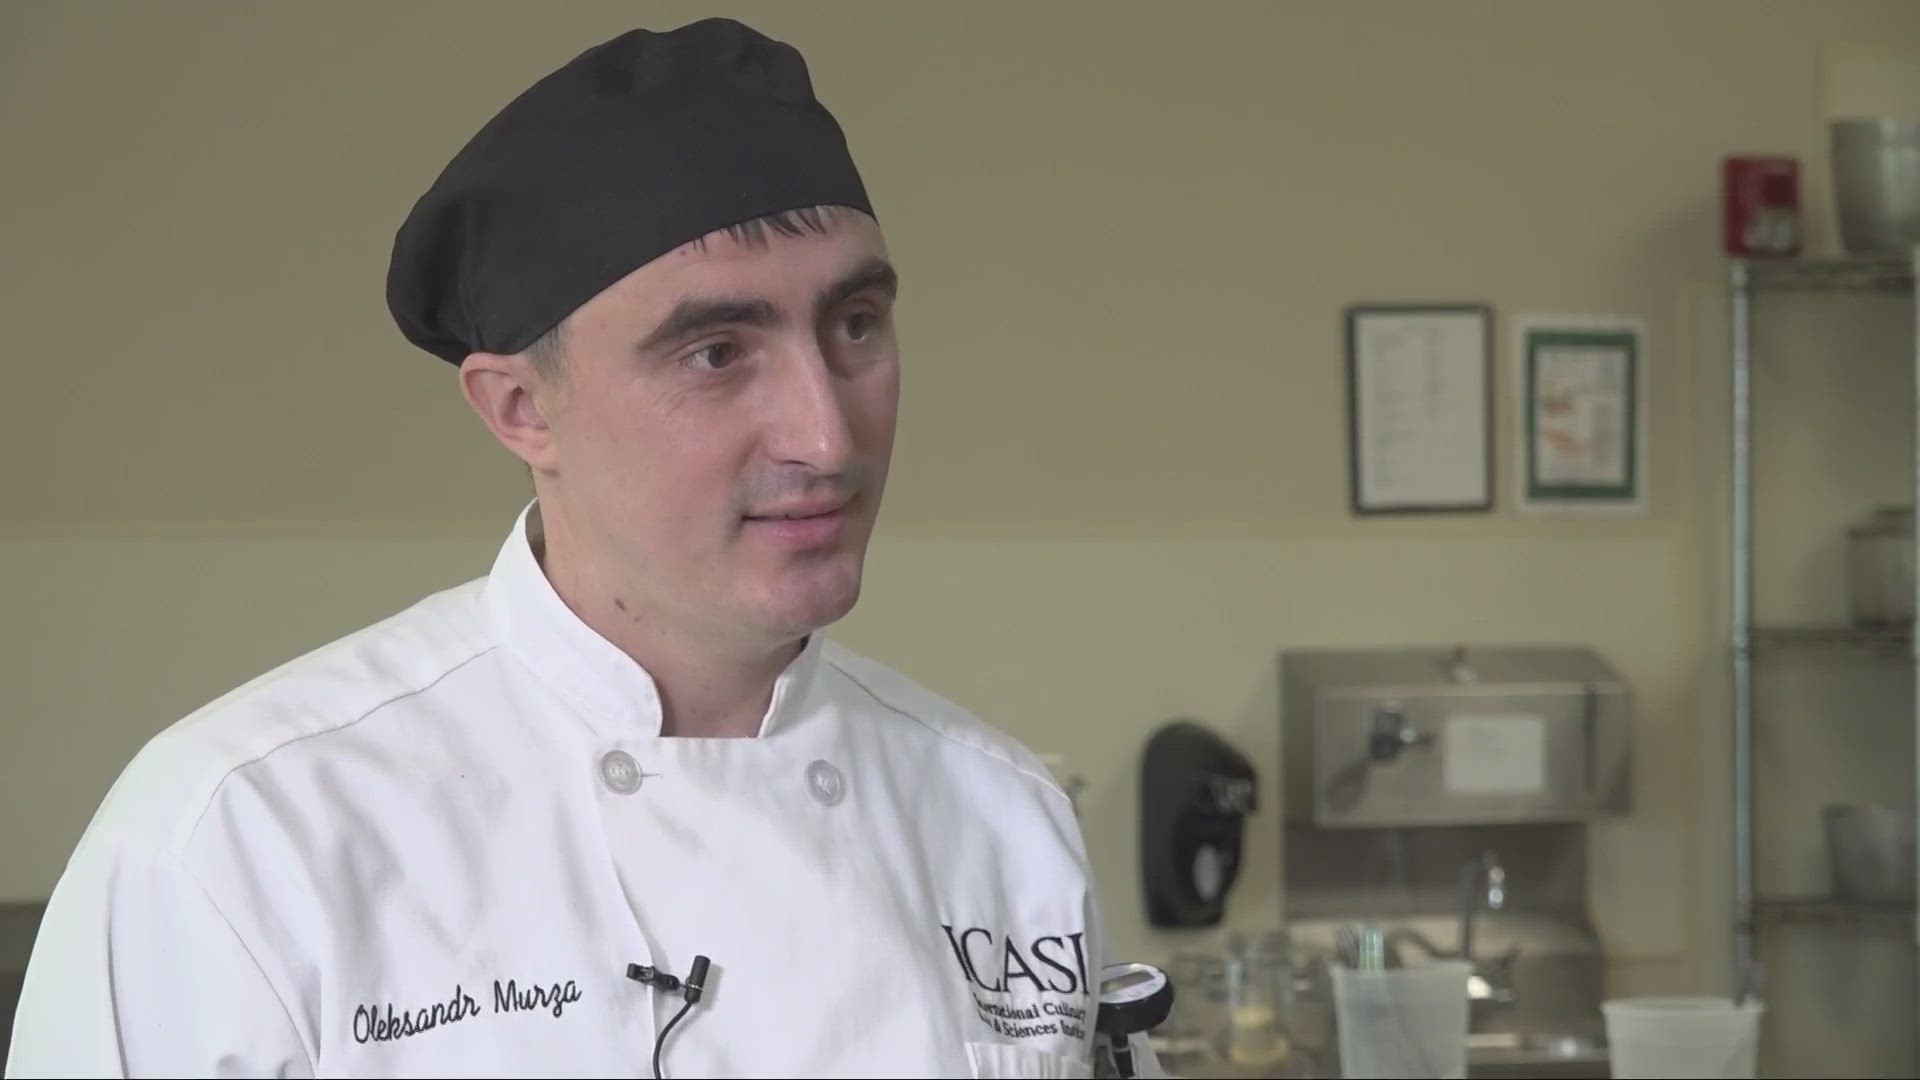 Alex Murza has always dreamed of being a chef. Thanks to a local culinary school, he'll get to be one.